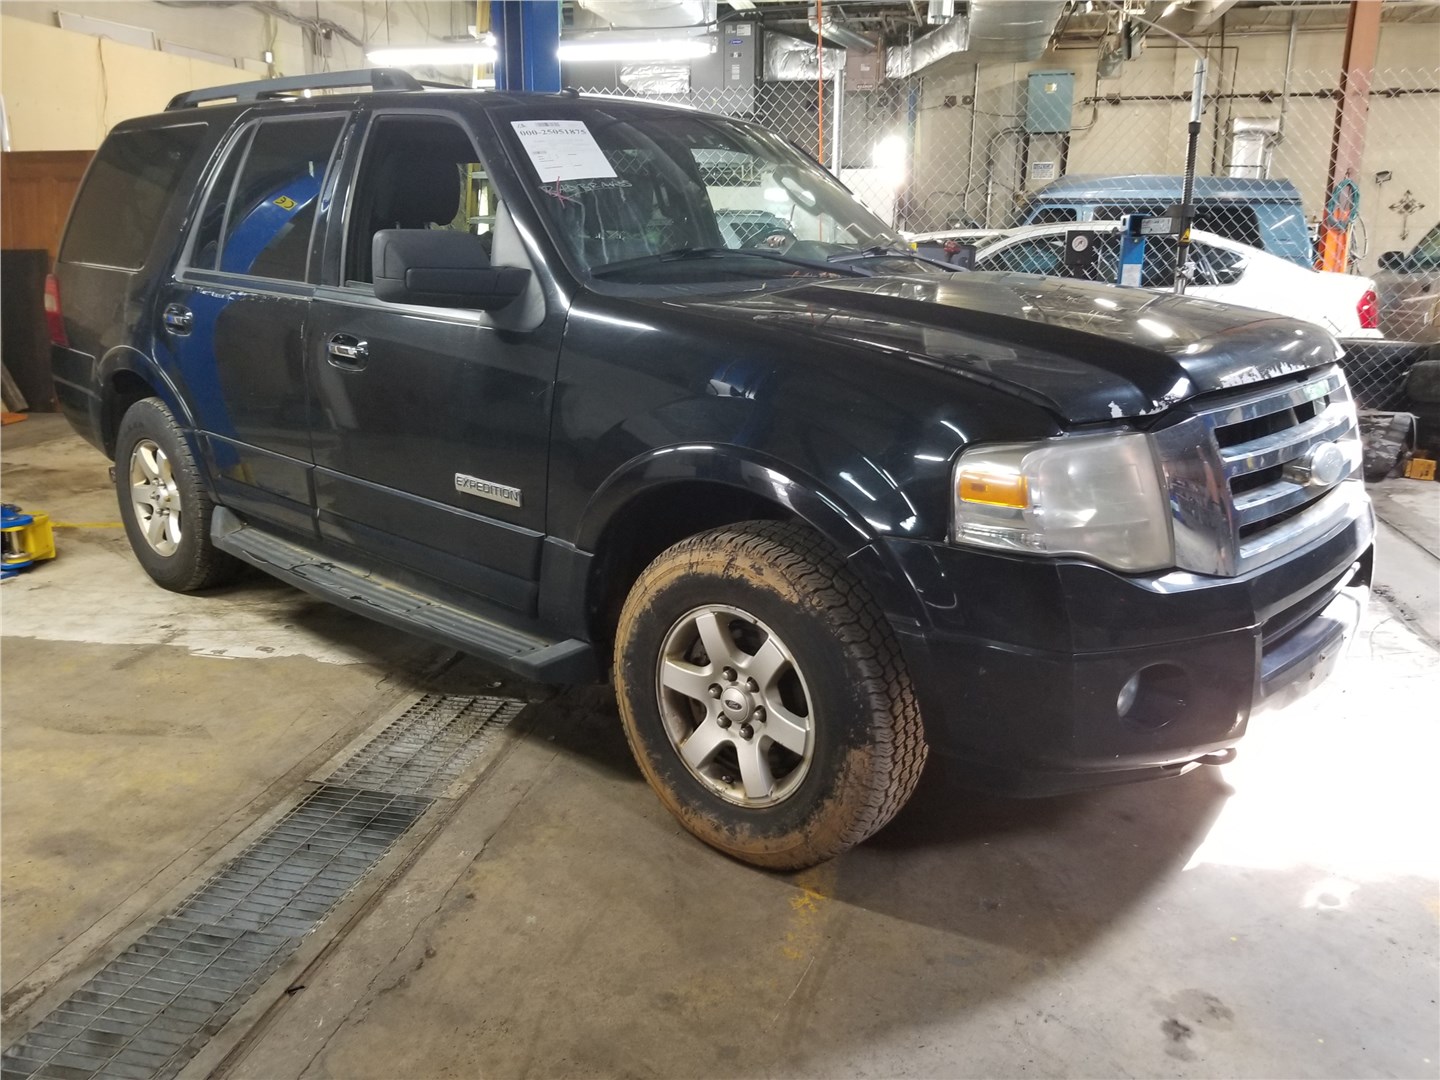 7L1Z5A972AA Рычаг подвески Ford Expedition 2006-2014 2008